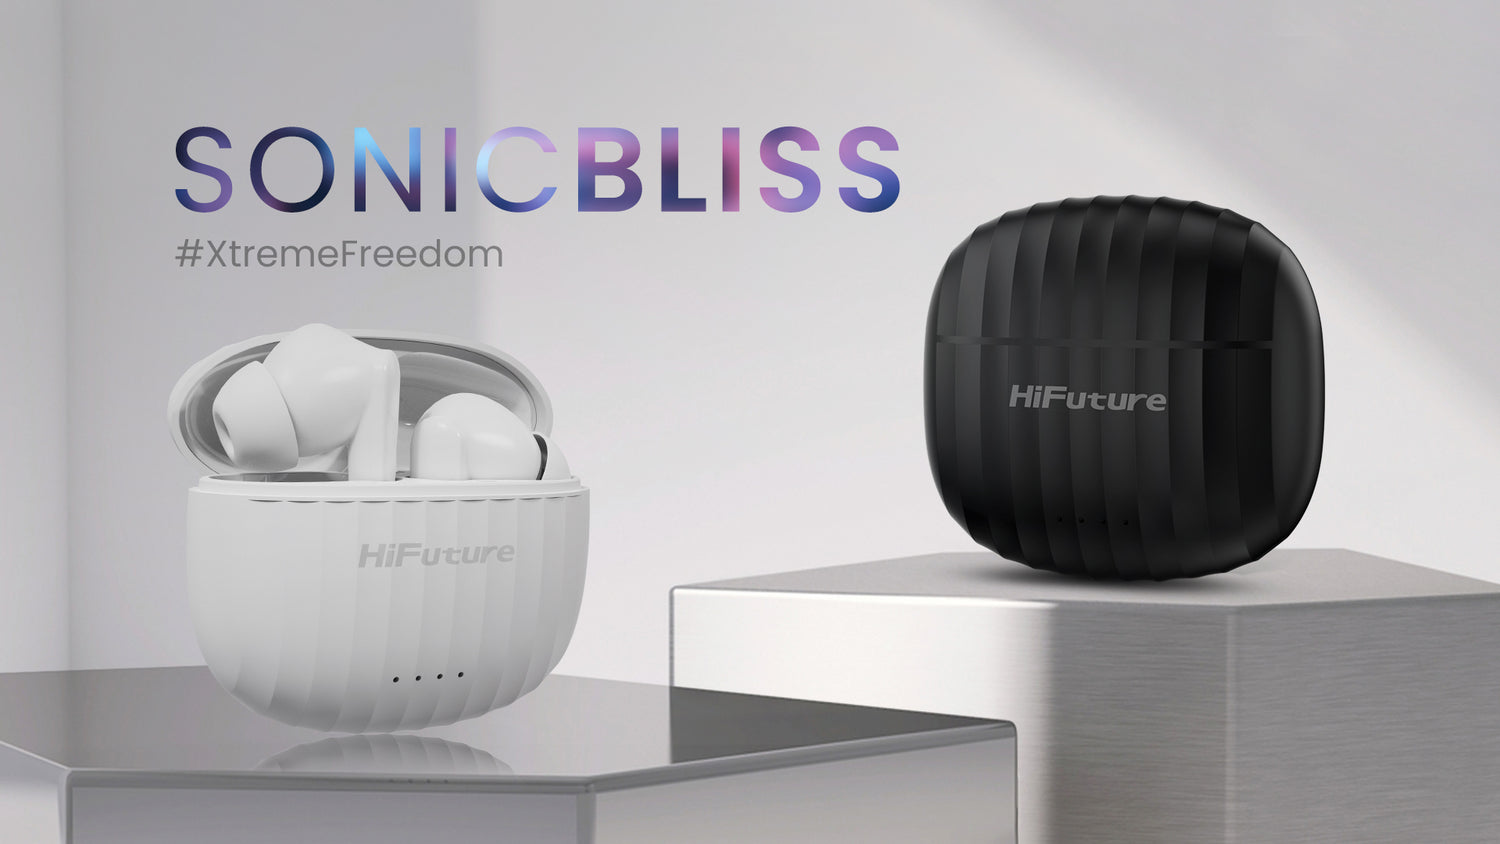 Let Your Ear Find the Bliss with HiFuture’s All New SonicBliss Earbuds